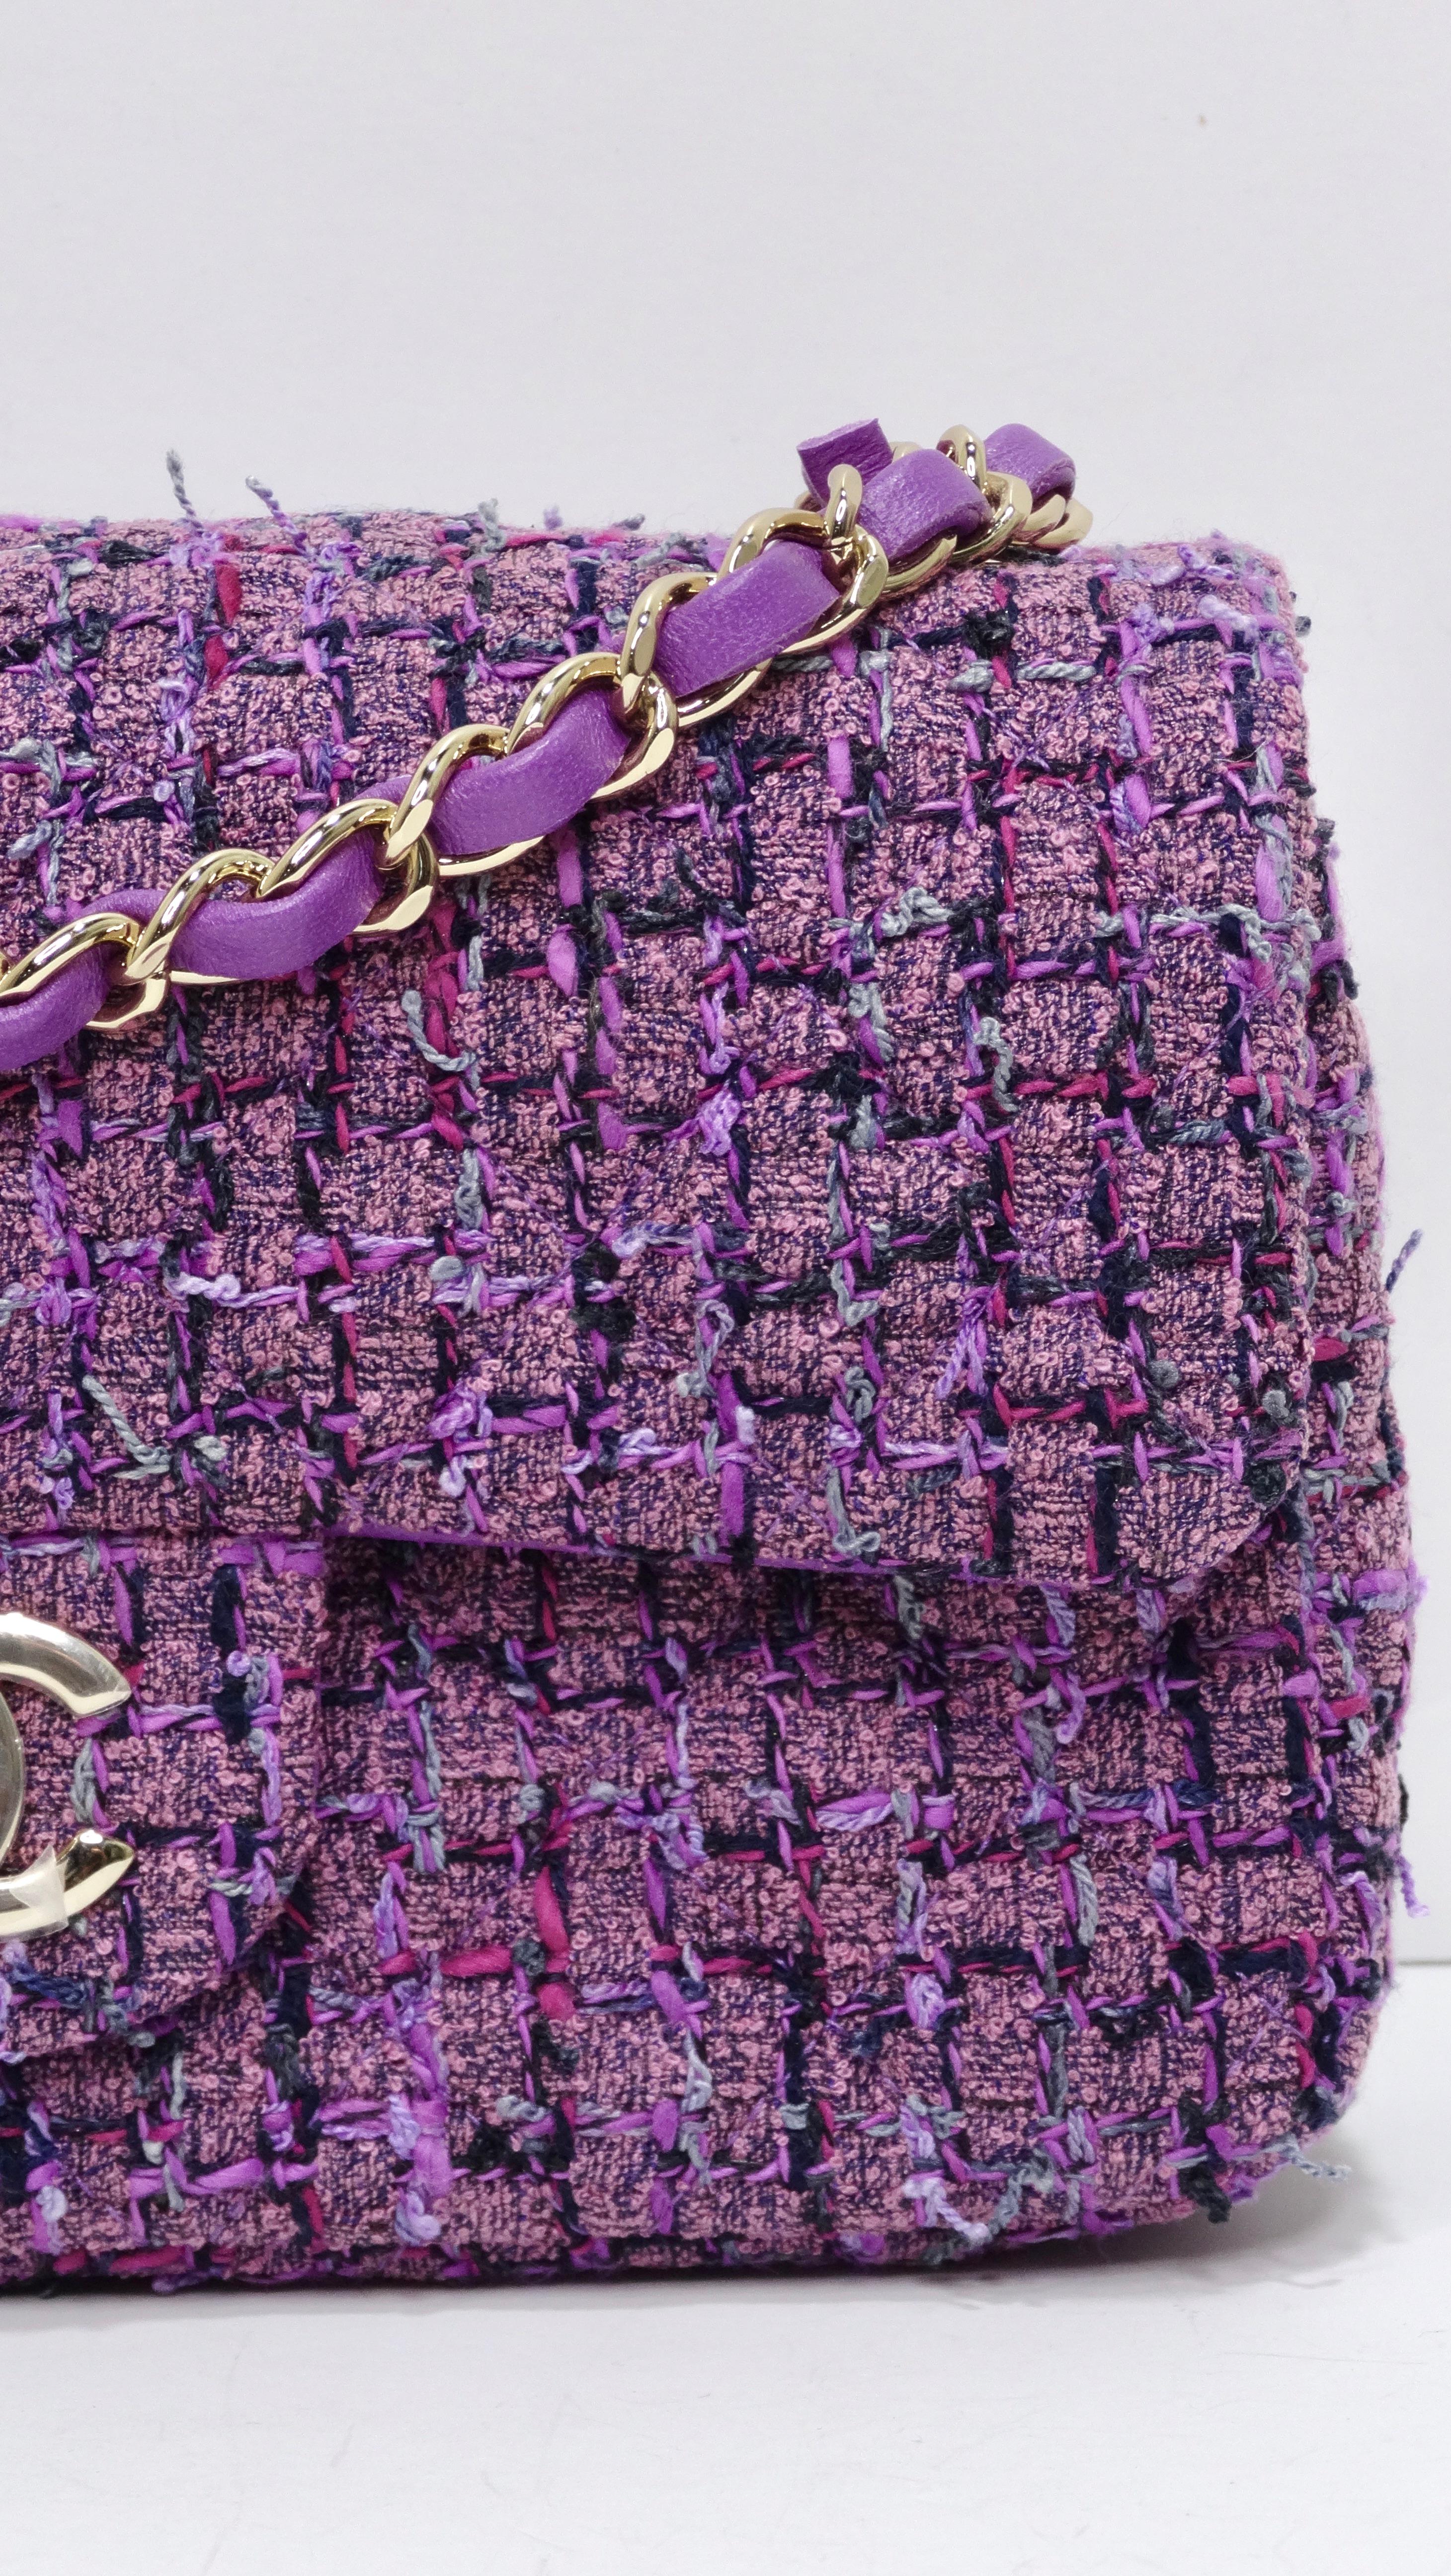 Elevate your handbag selection with this PURPLE Chanel! This highly detailed bag is like eye candy. This bag is brand new with tags from the Spring and Summer 2022 Collection by Virginie Viard. The purple tweed has a beautifully vibrant but soft